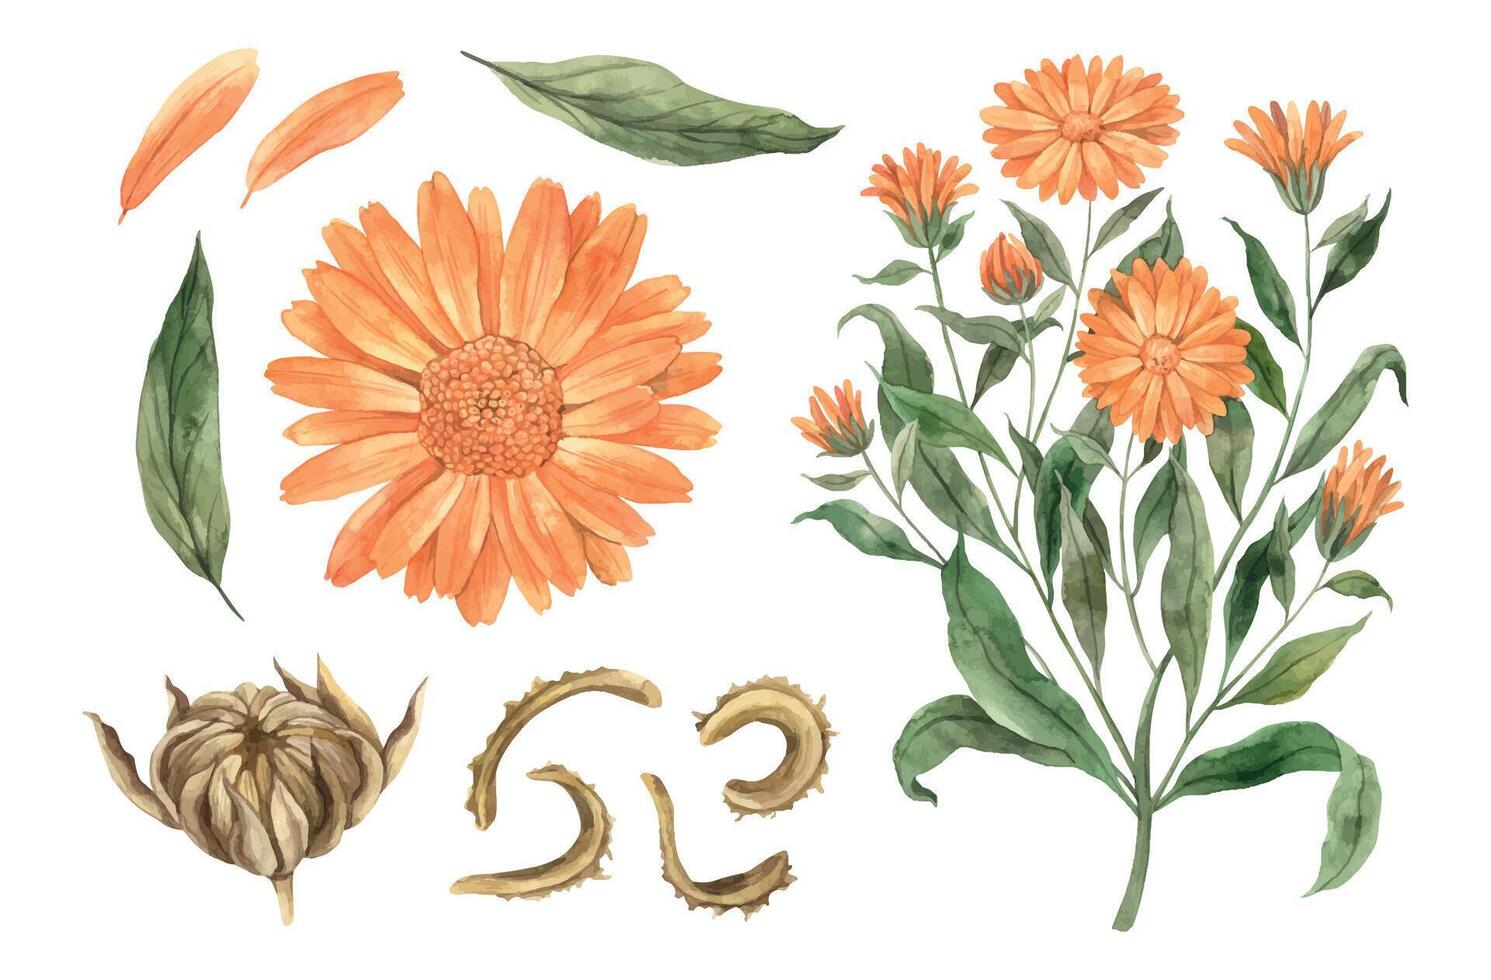 Watercolor botanical set of calendula flowers. Hand drawn illustration on isolated background, suitable for menu design, packaging, poster, website, textile, invitation, brochure, textile vector